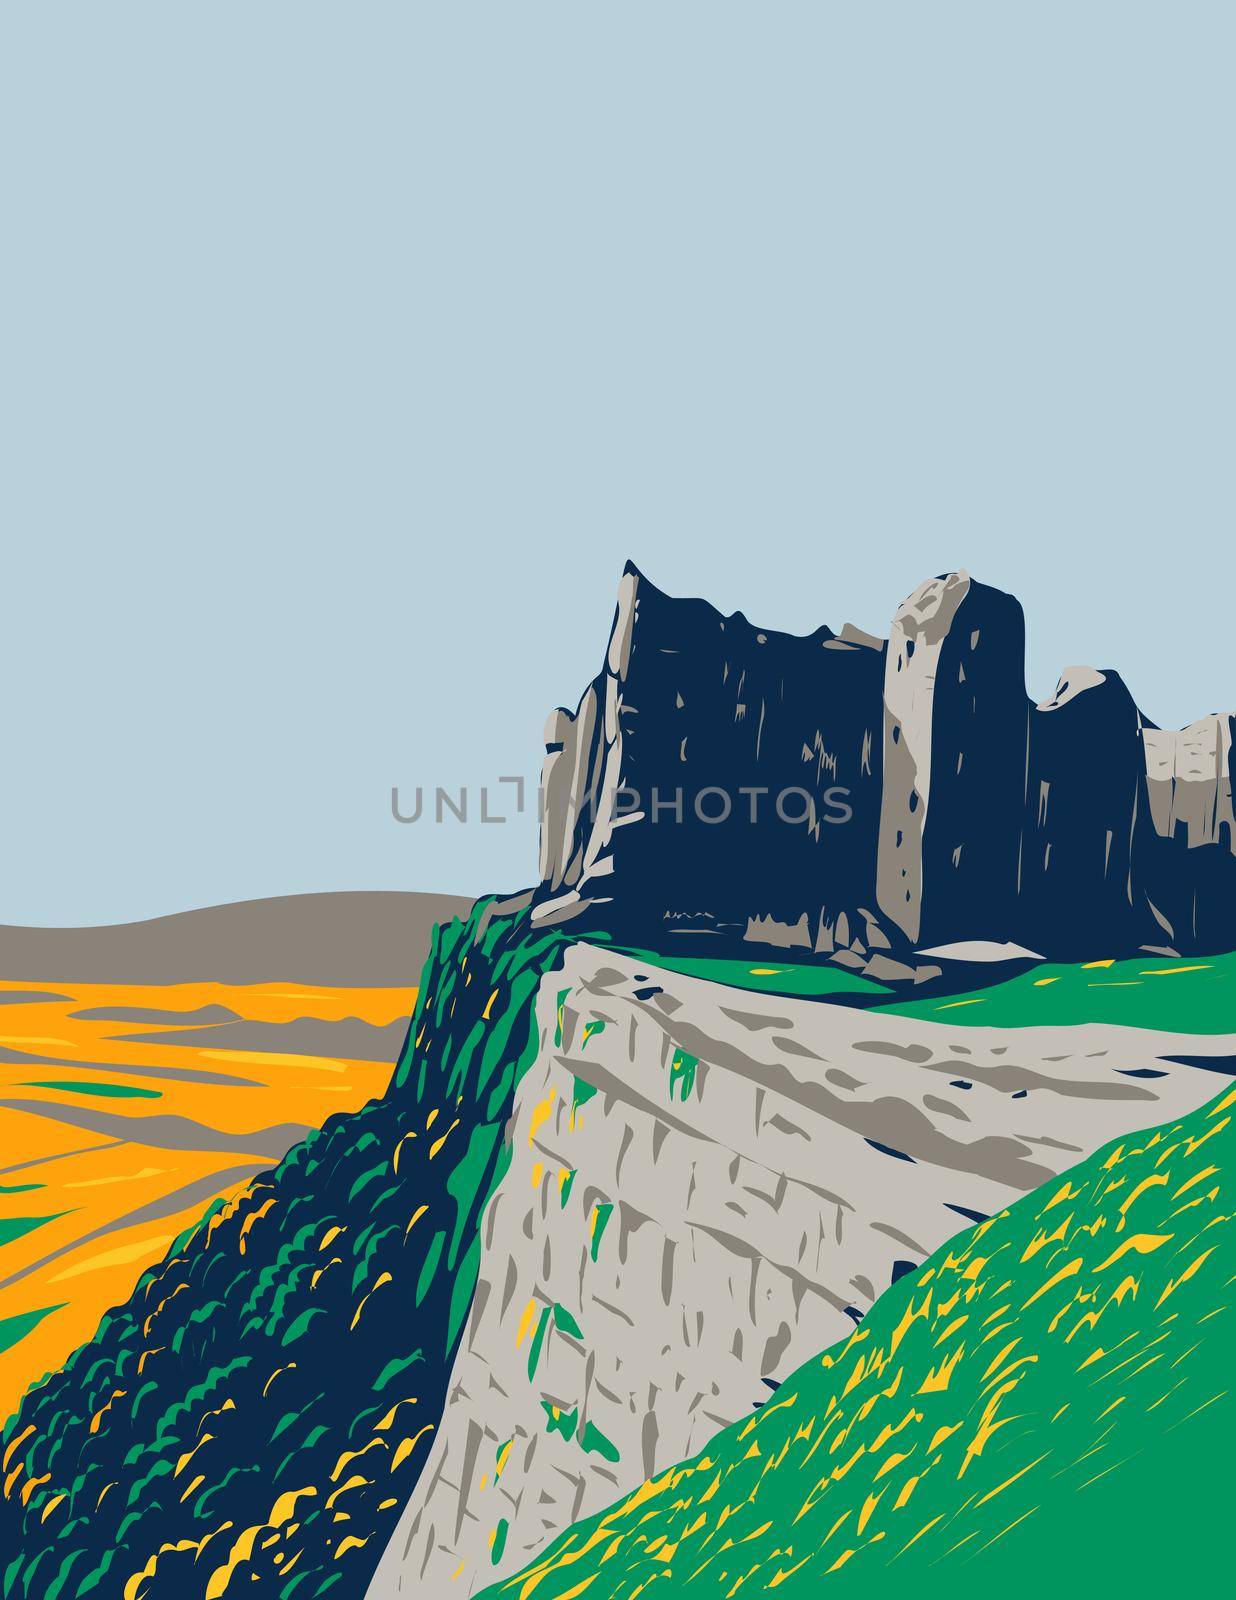 Carreg Cennen Castle Ruins Located Within Brecon Beacons National Park in Wales Uk Art Deco WPA Poster Art by patrimonio